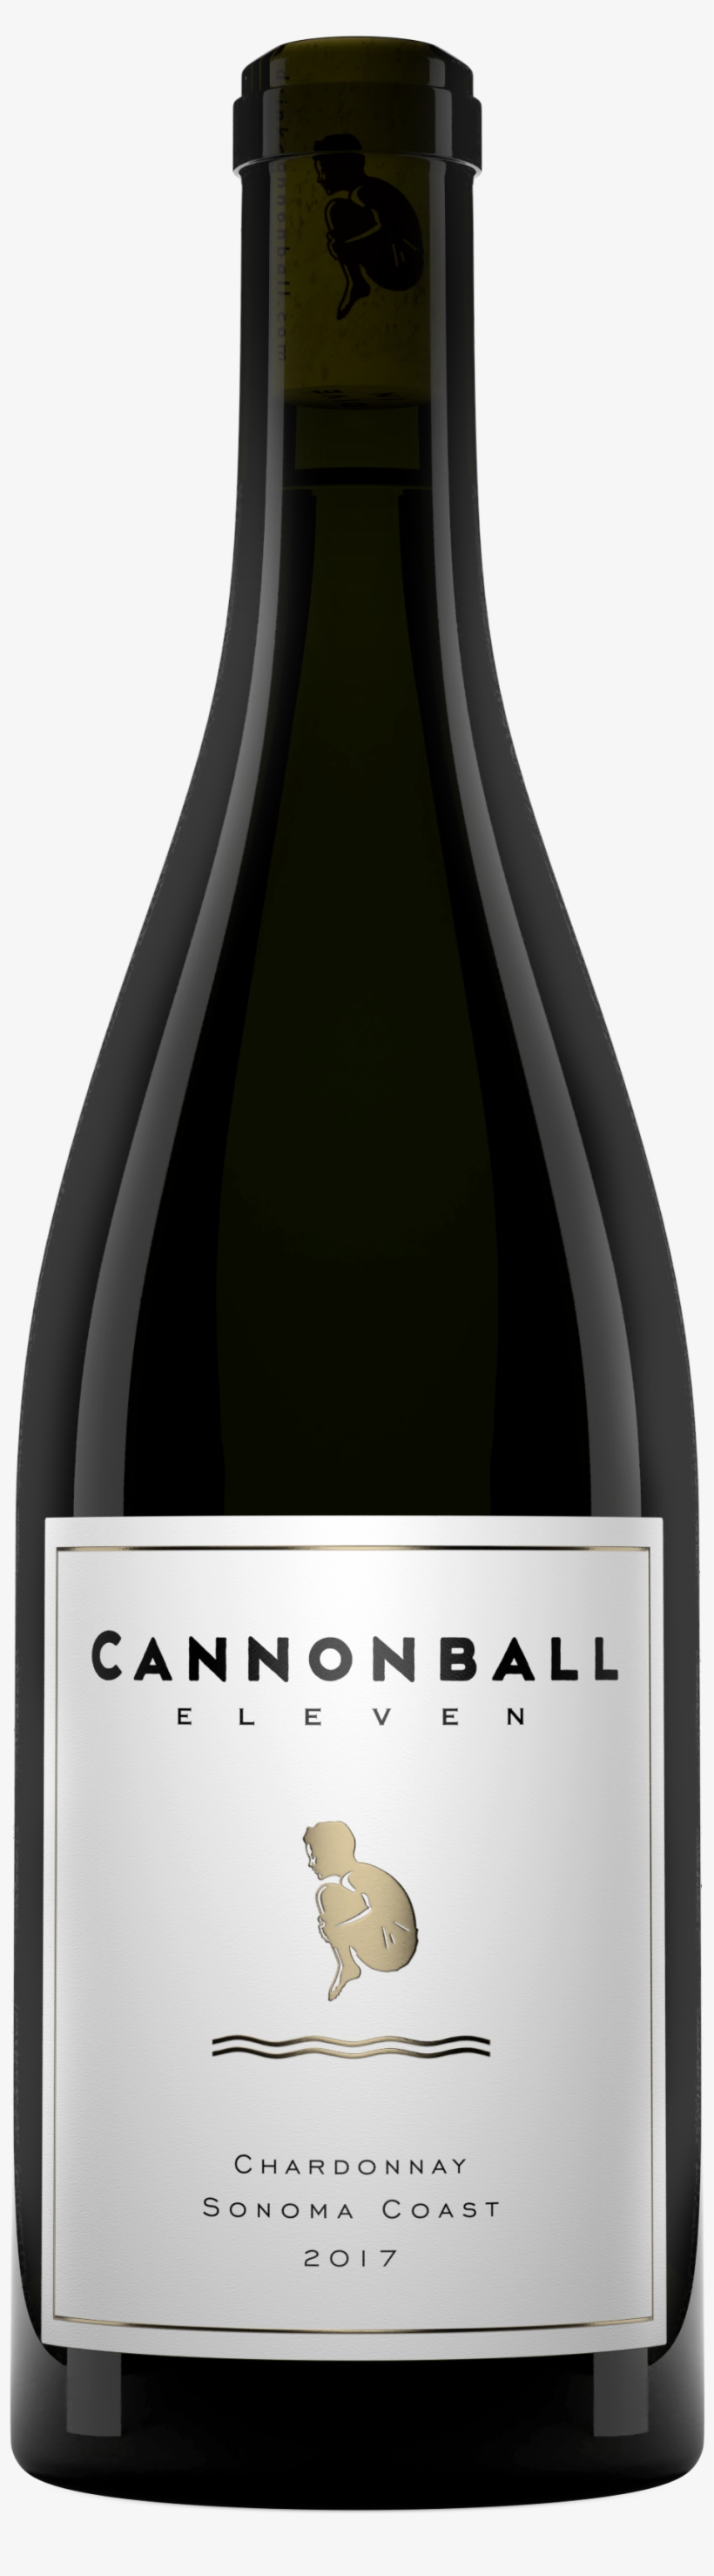 Bottle - Cannonball Wine, transparent png #963383